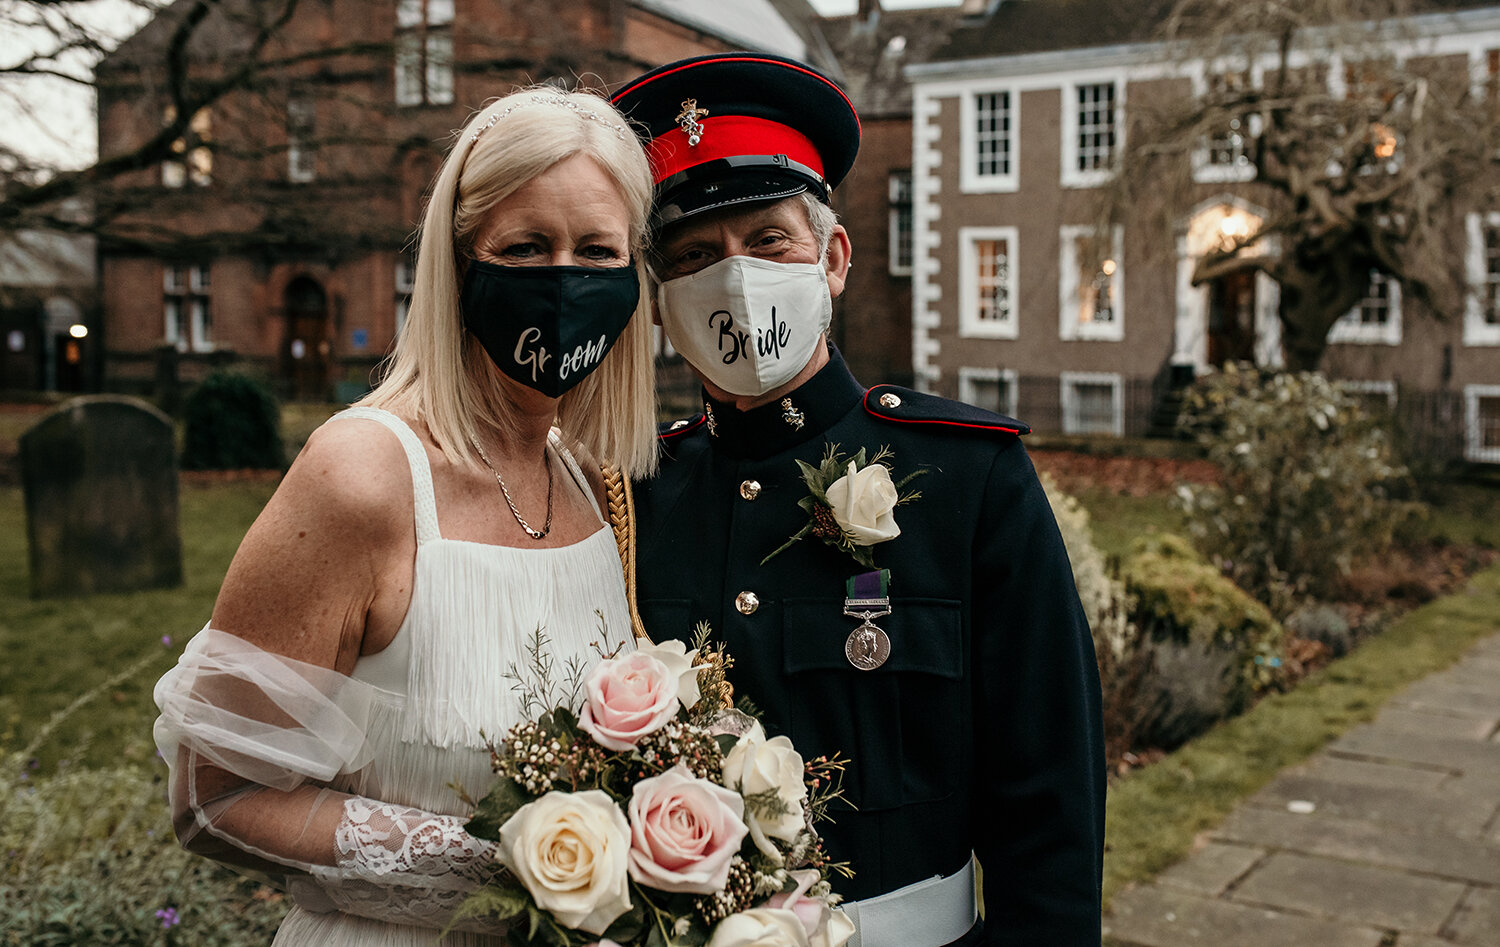 The bride and groom wearing their masks